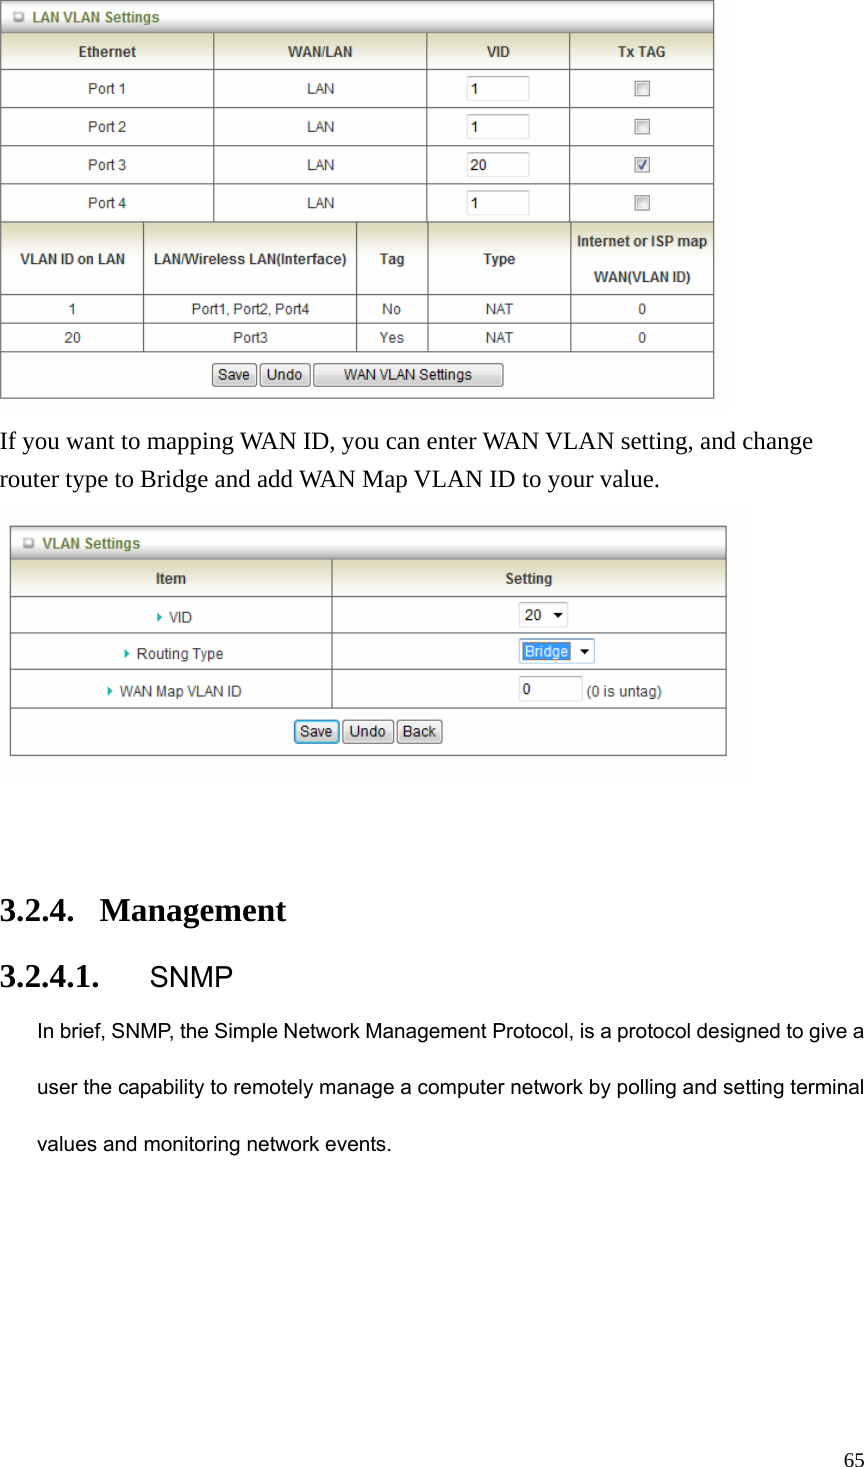  65 If you want to mapping WAN ID, you can enter WAN VLAN setting, and change router type to Bridge and add WAN Map VLAN ID to your value.   3.2.4. Management 3.2.4.1. SNMP In brief, SNMP, the Simple Network Management Protocol, is a protocol designed to give a user the capability to remotely manage a computer network by polling and setting terminal values and monitoring network events.   